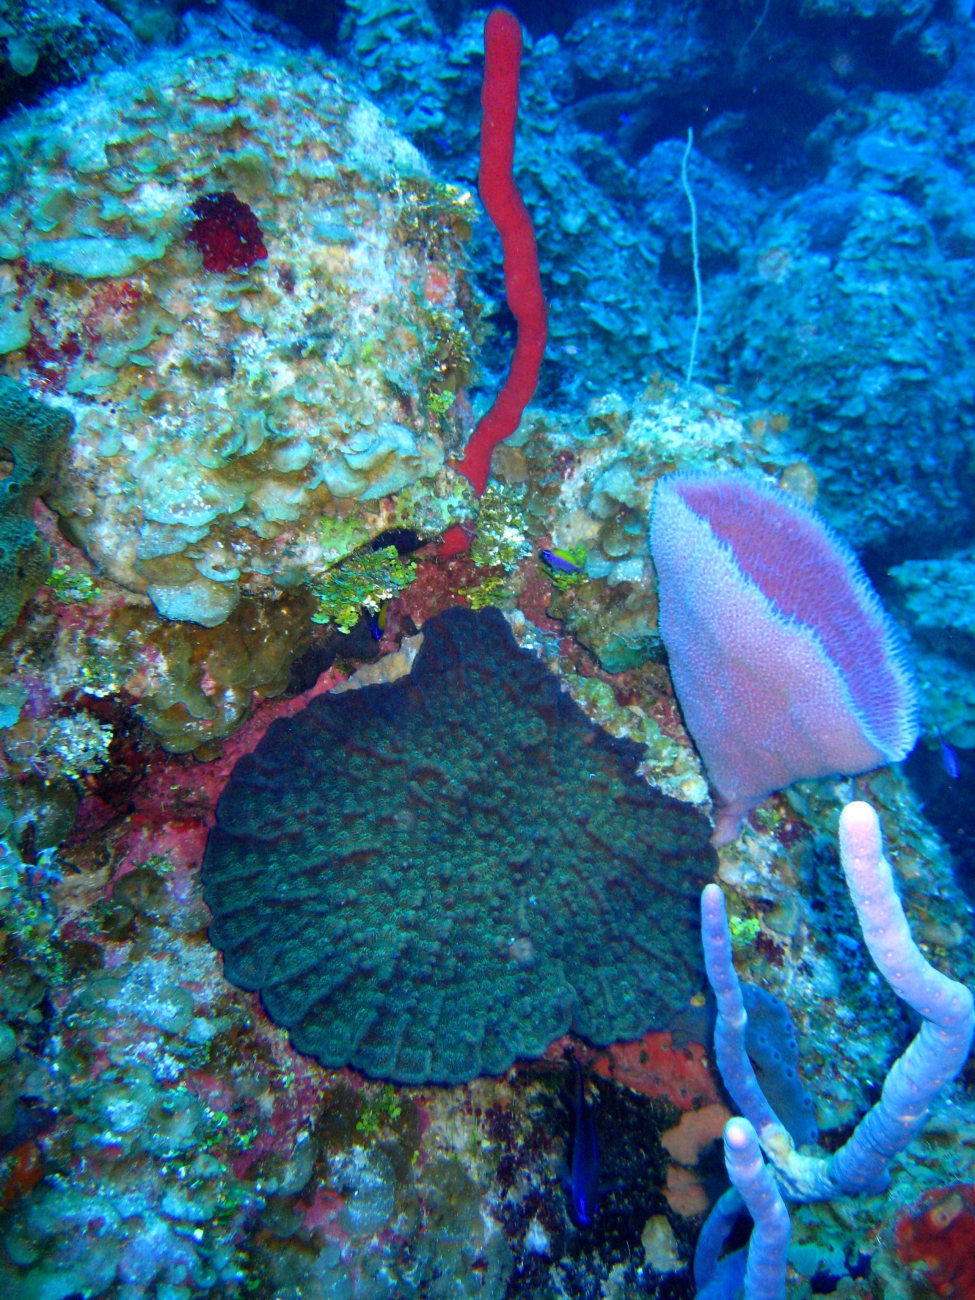 A red rope sponge, a small pink vase sponge, pink rope sponges, and ascallop shaped star coral 